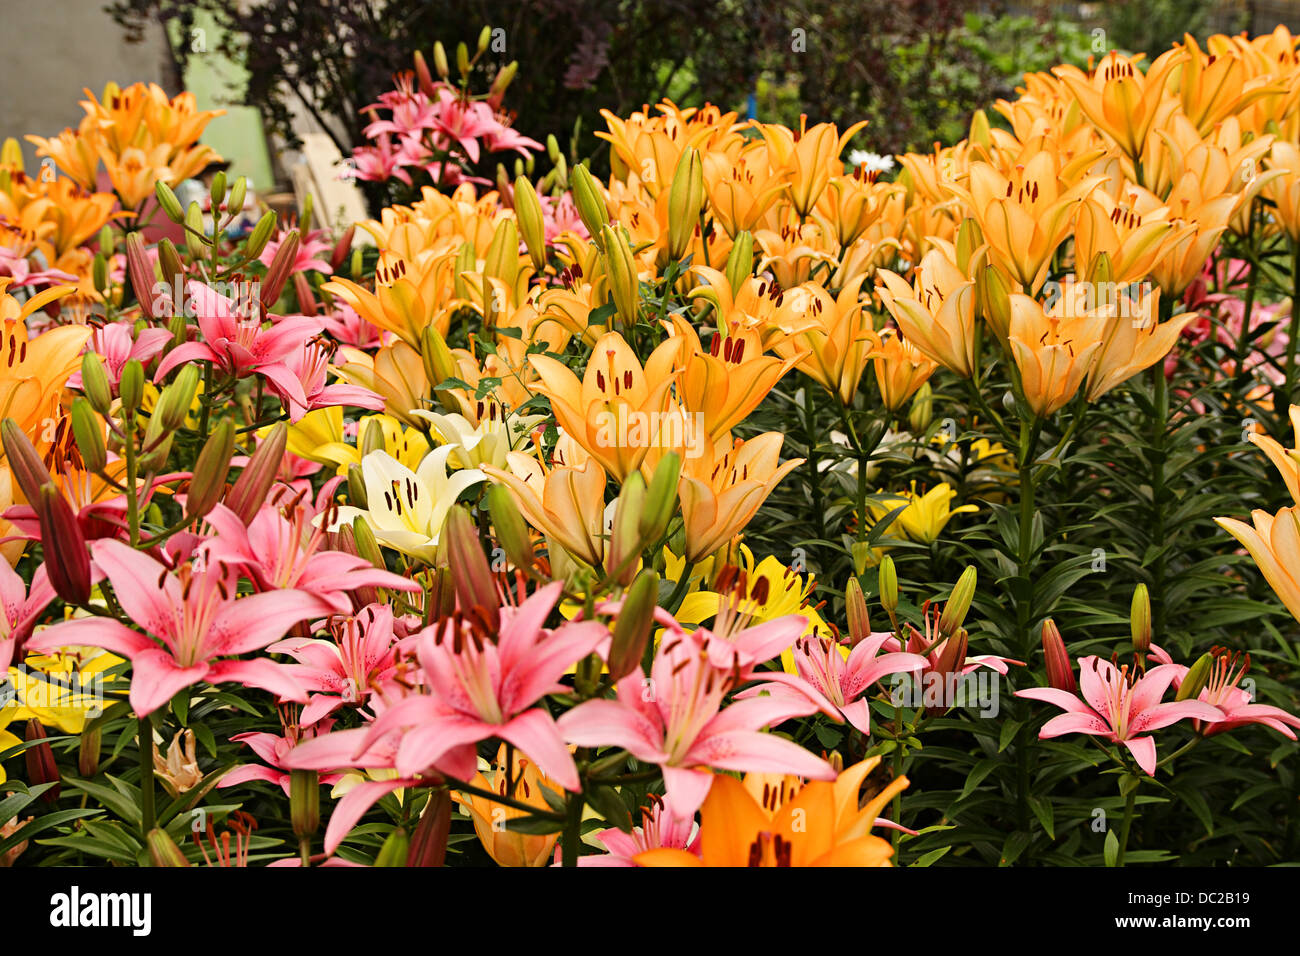 Flowers. Multicolored lilies on a flowerbed Stock Photo